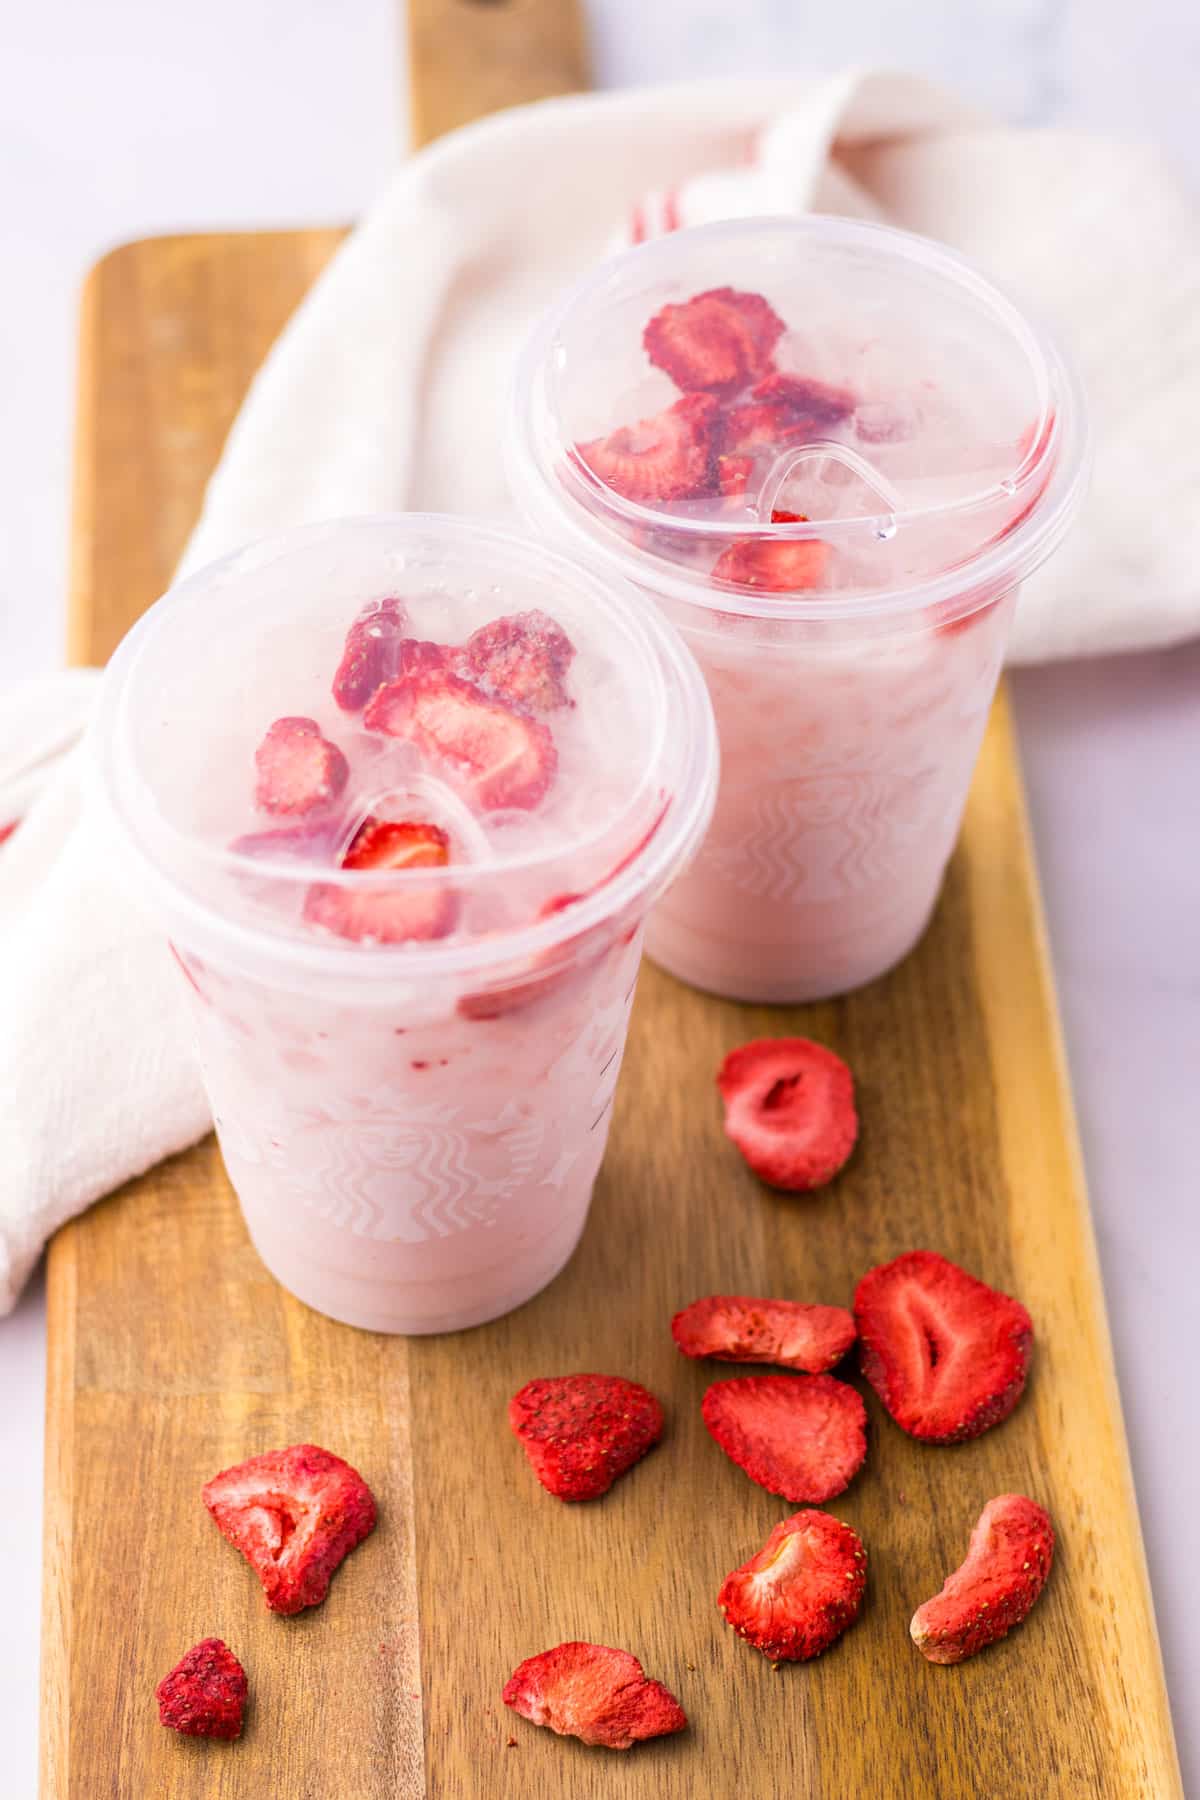 Cups of Copycat Starbucks Pink Drink with strawberries on a wooden board.